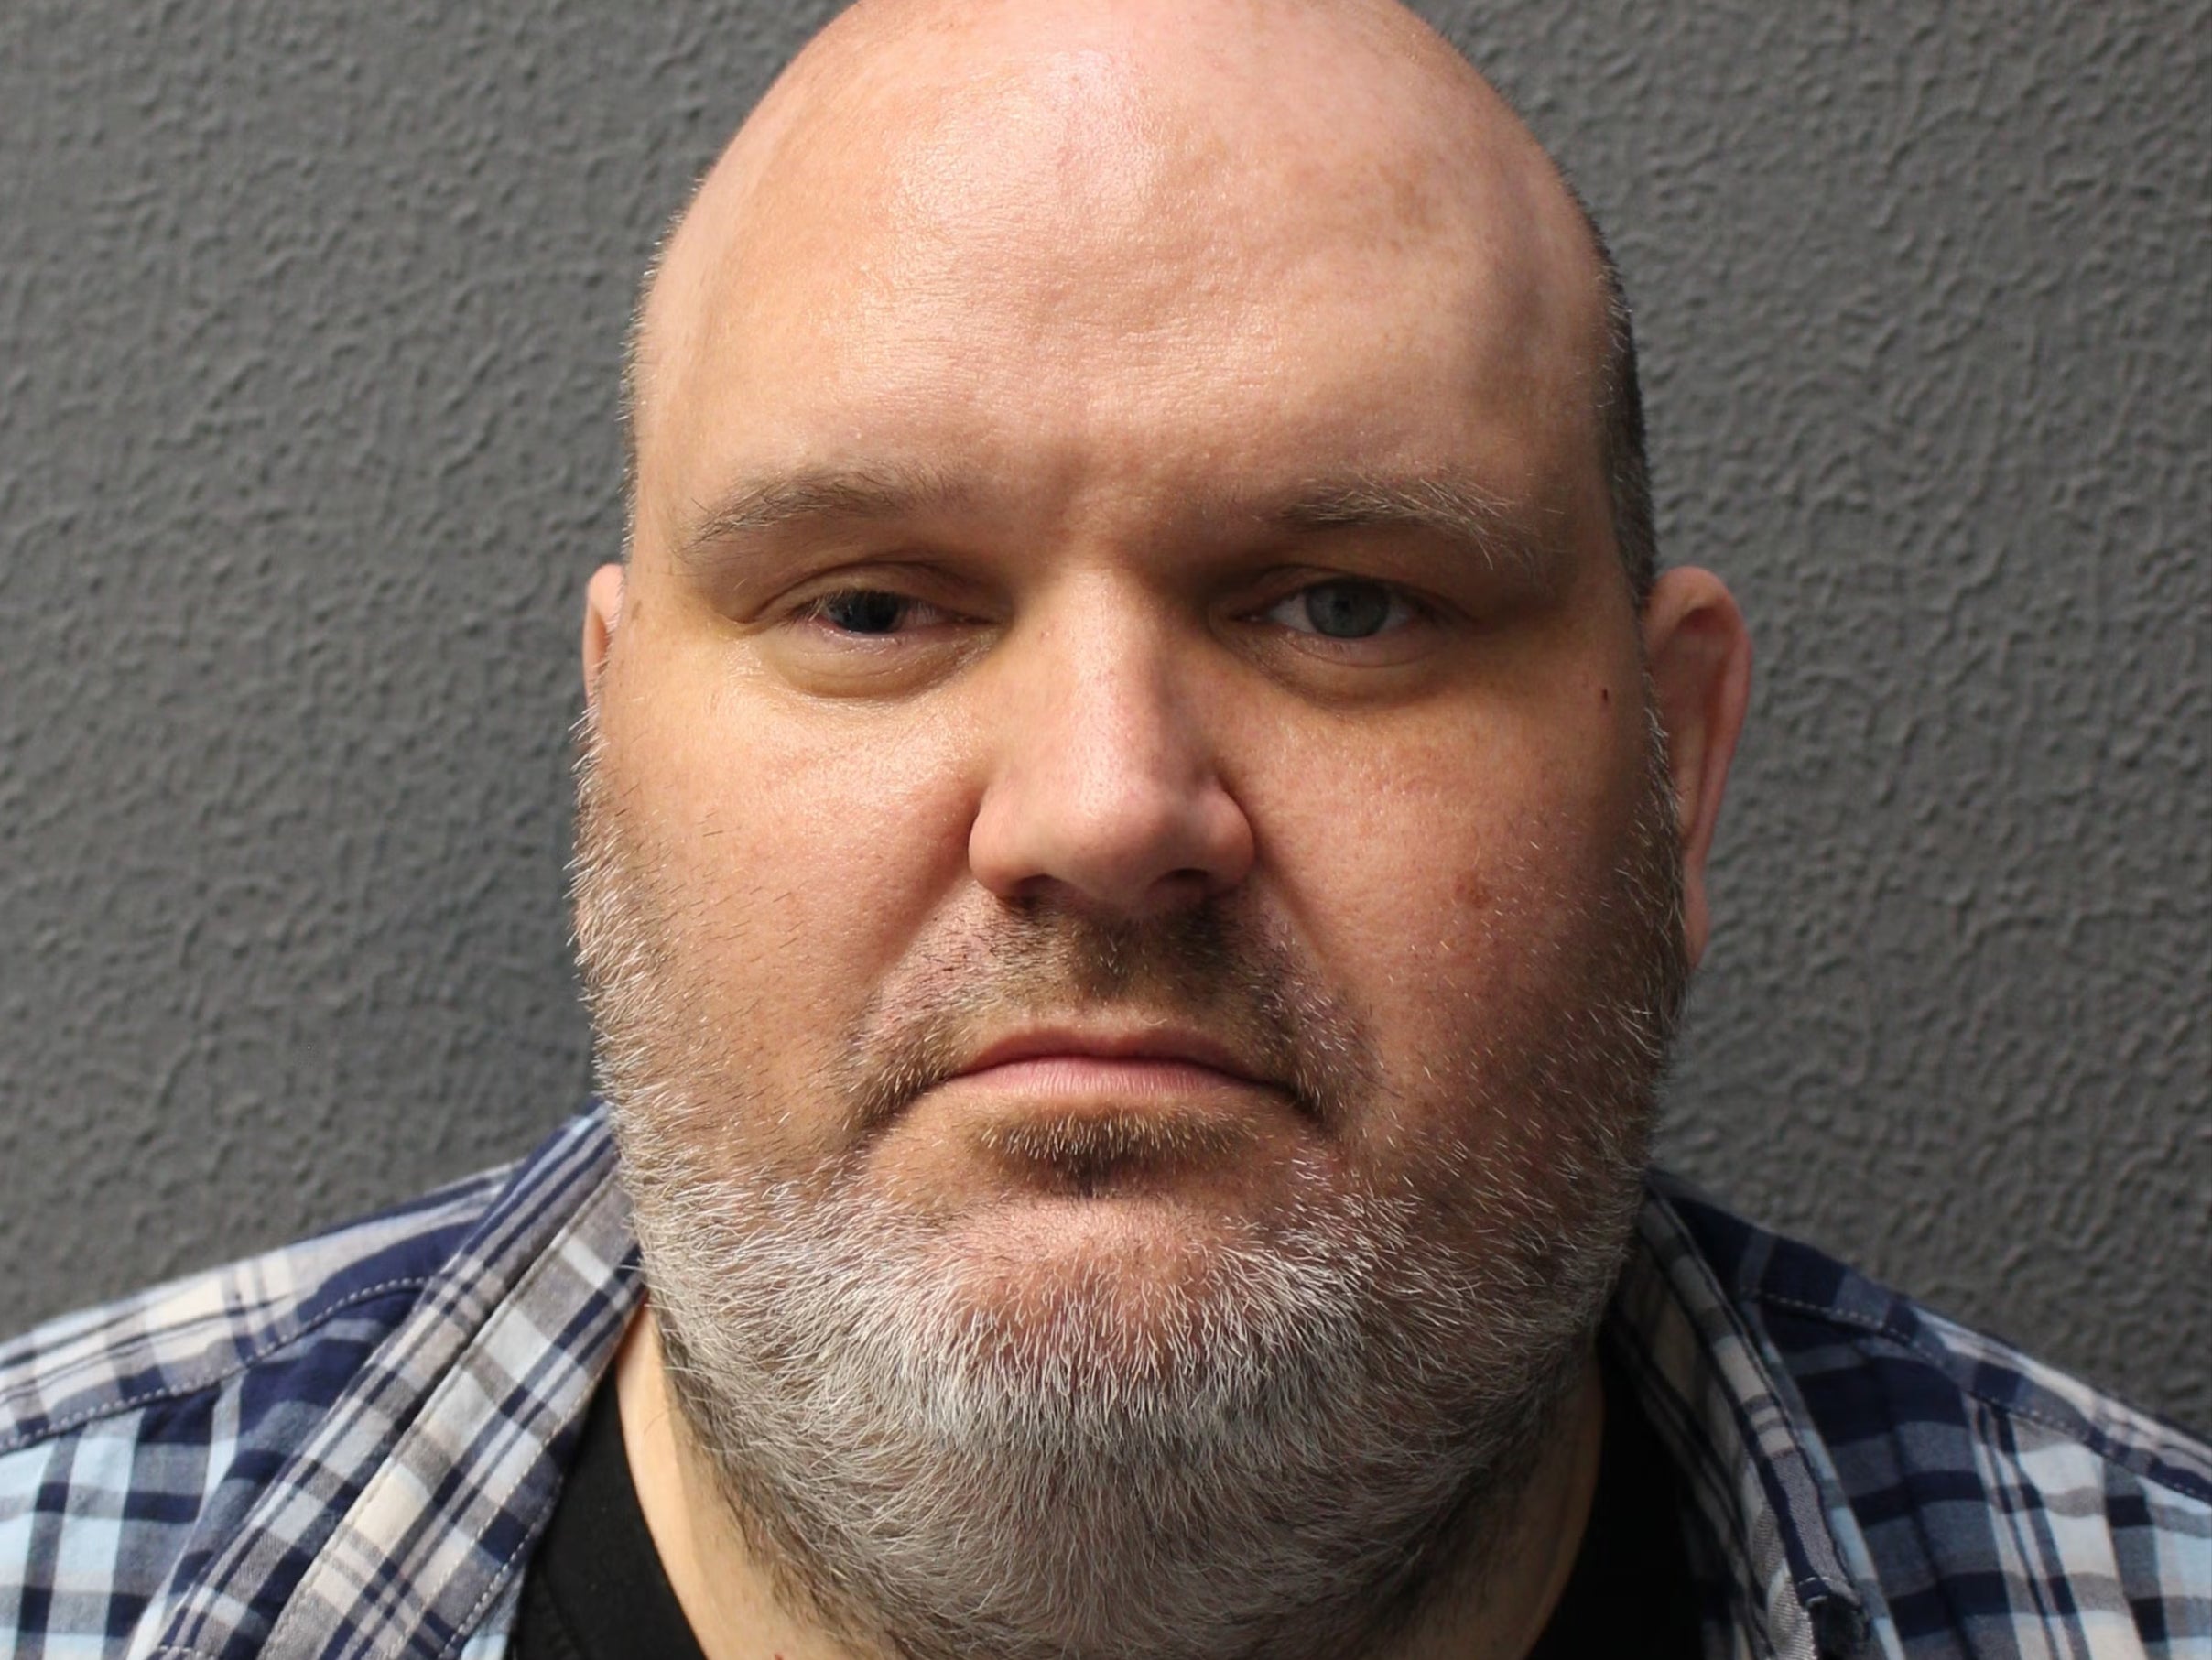 Marius Gustavson, 46, has been jailed for life with a minimum term of 22 years